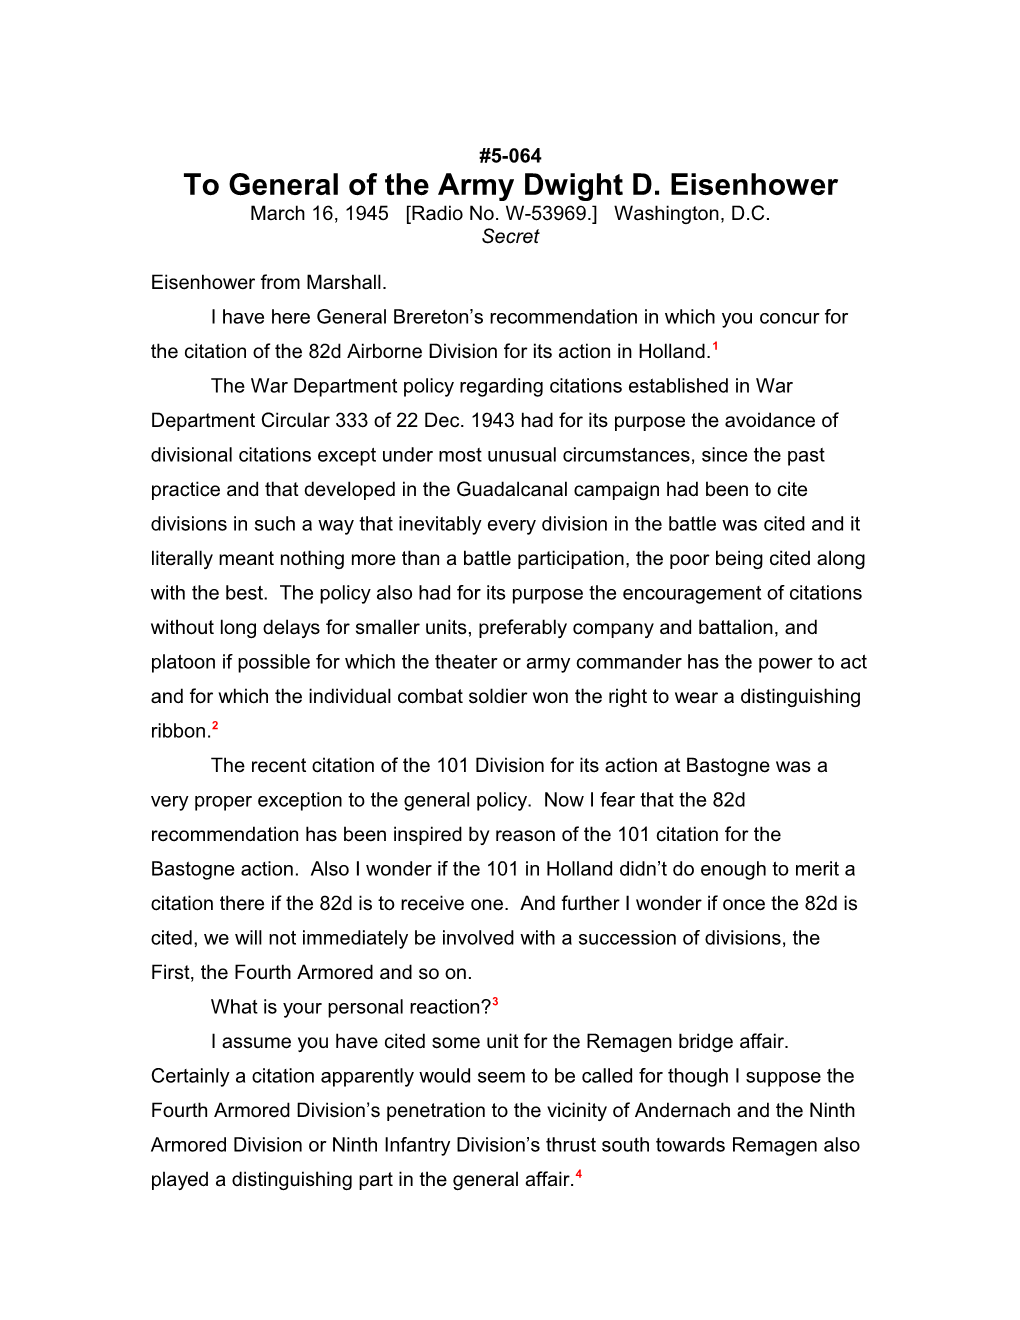 To General of the Army Dwight D. Eisenhower s2